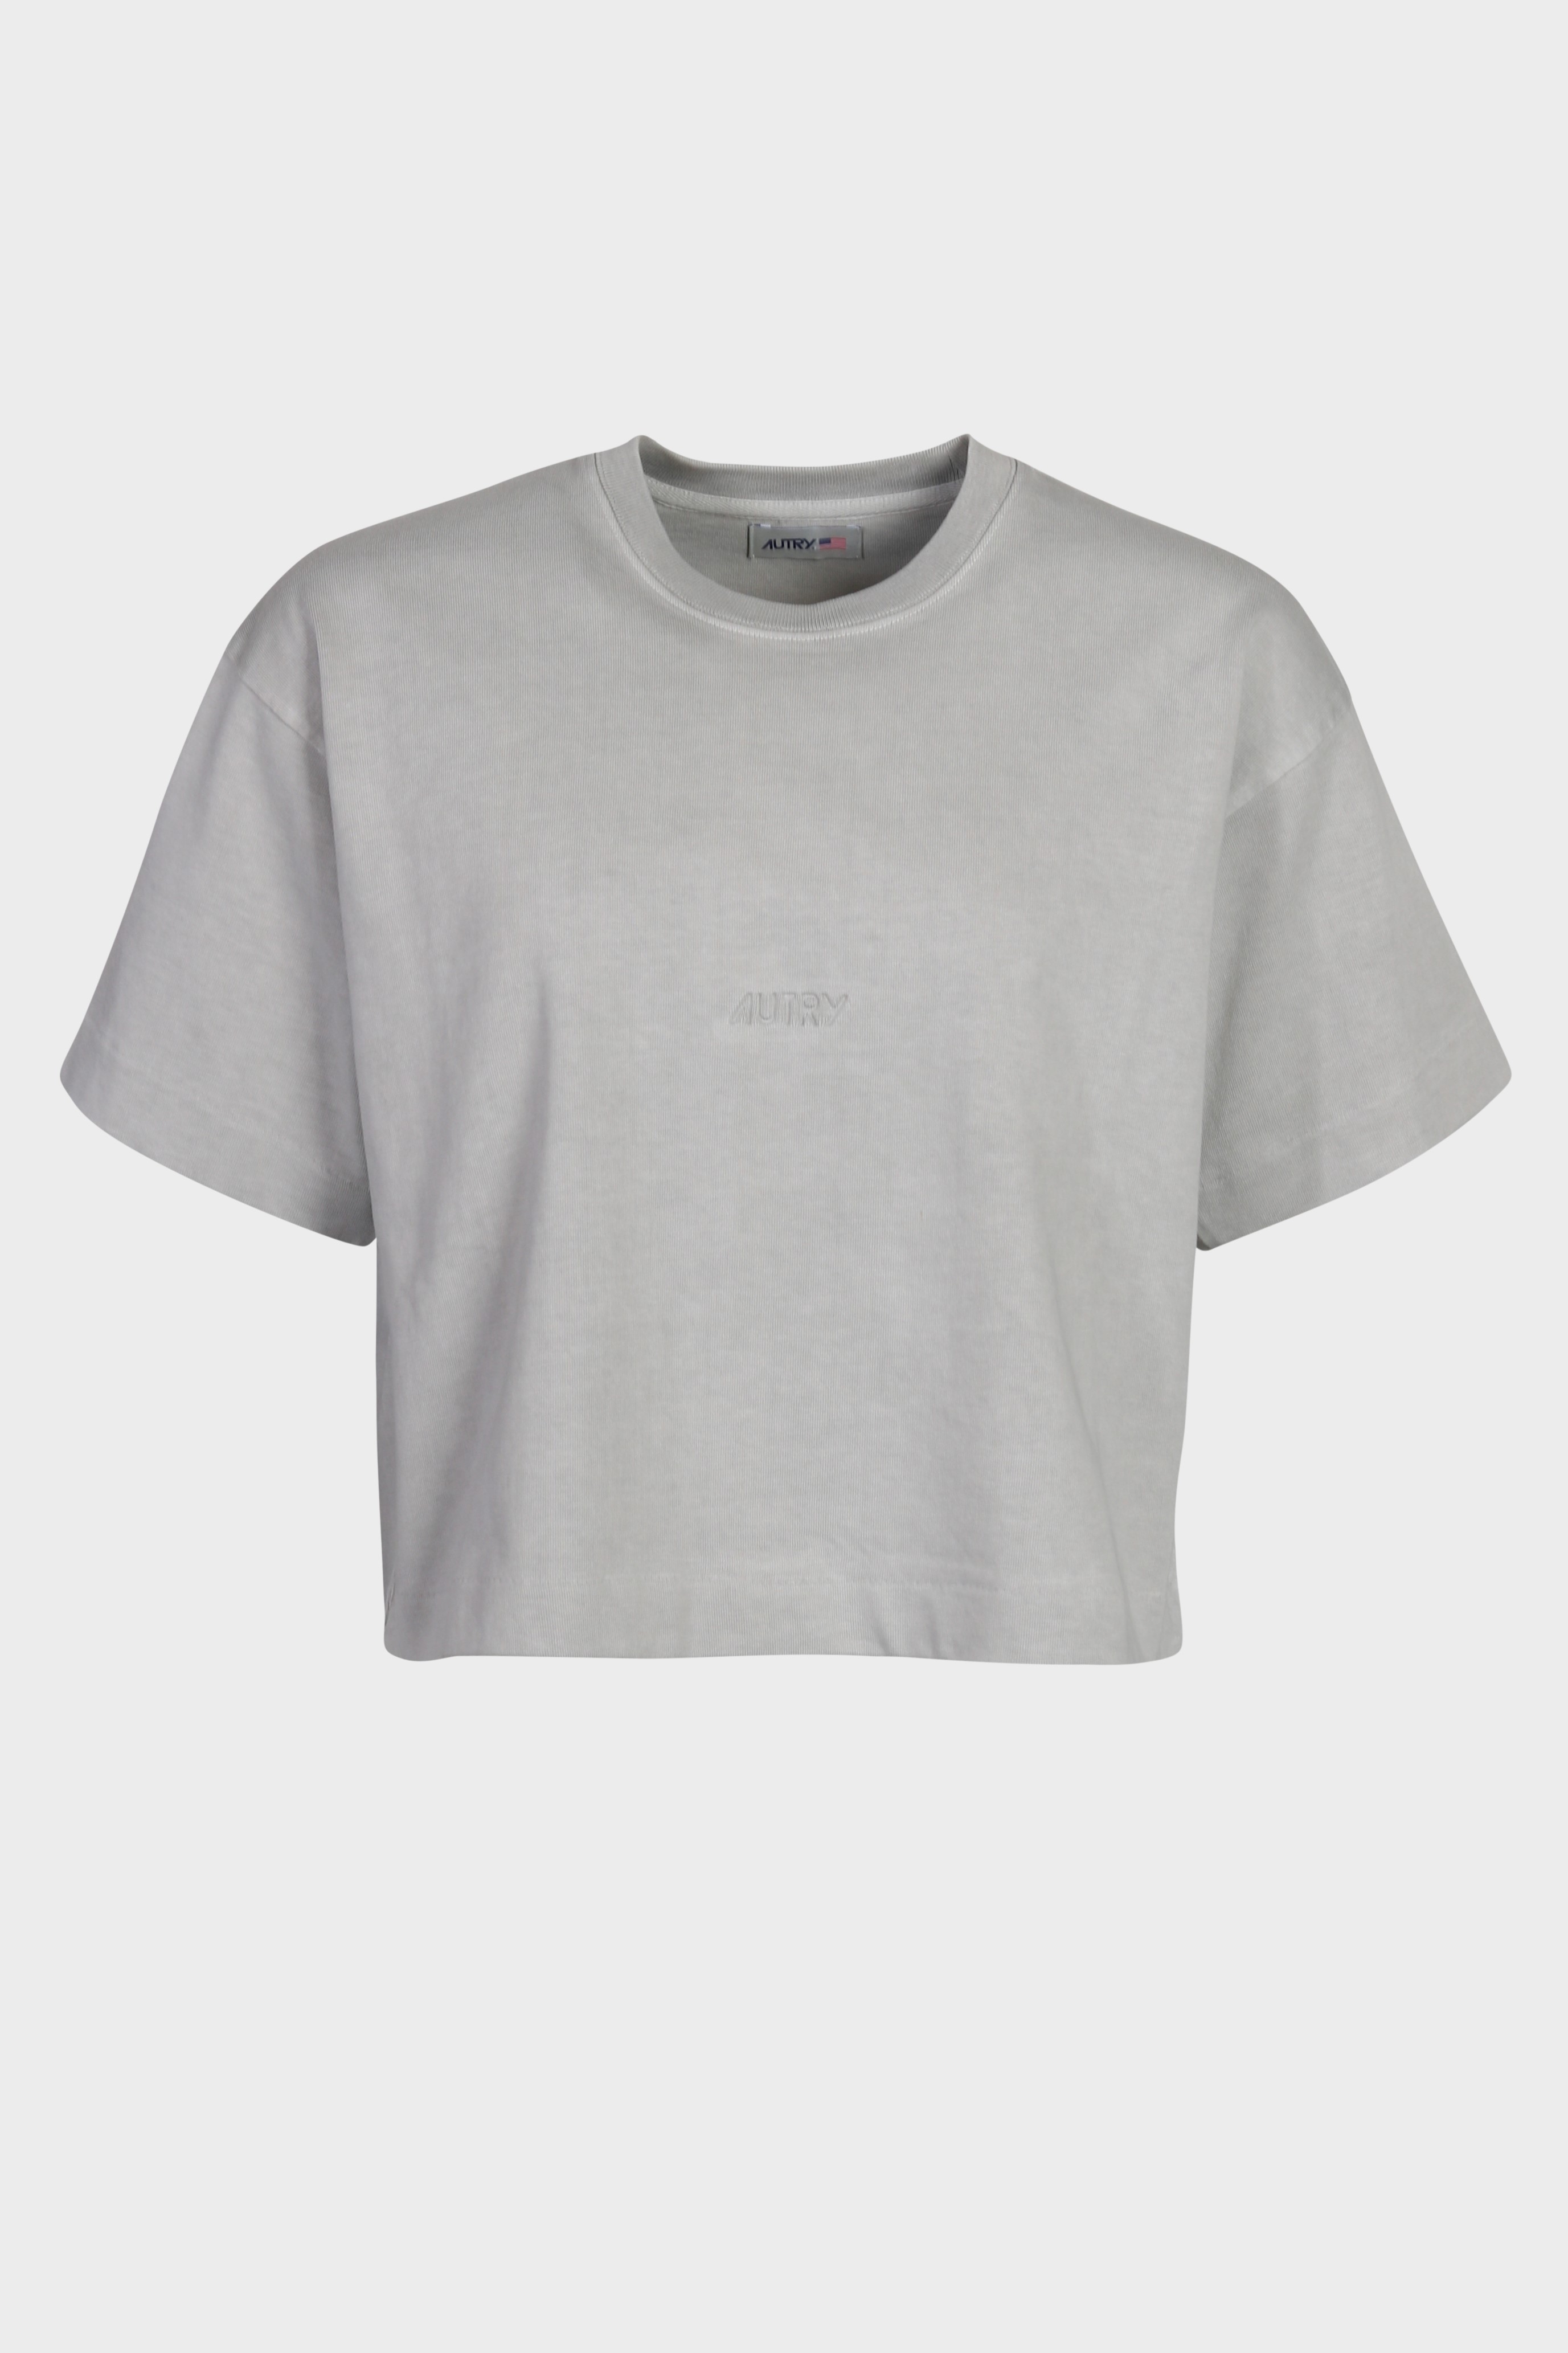 AUTRY ACTION PEOPLE Apparel T-Shirt in Grey Melange L